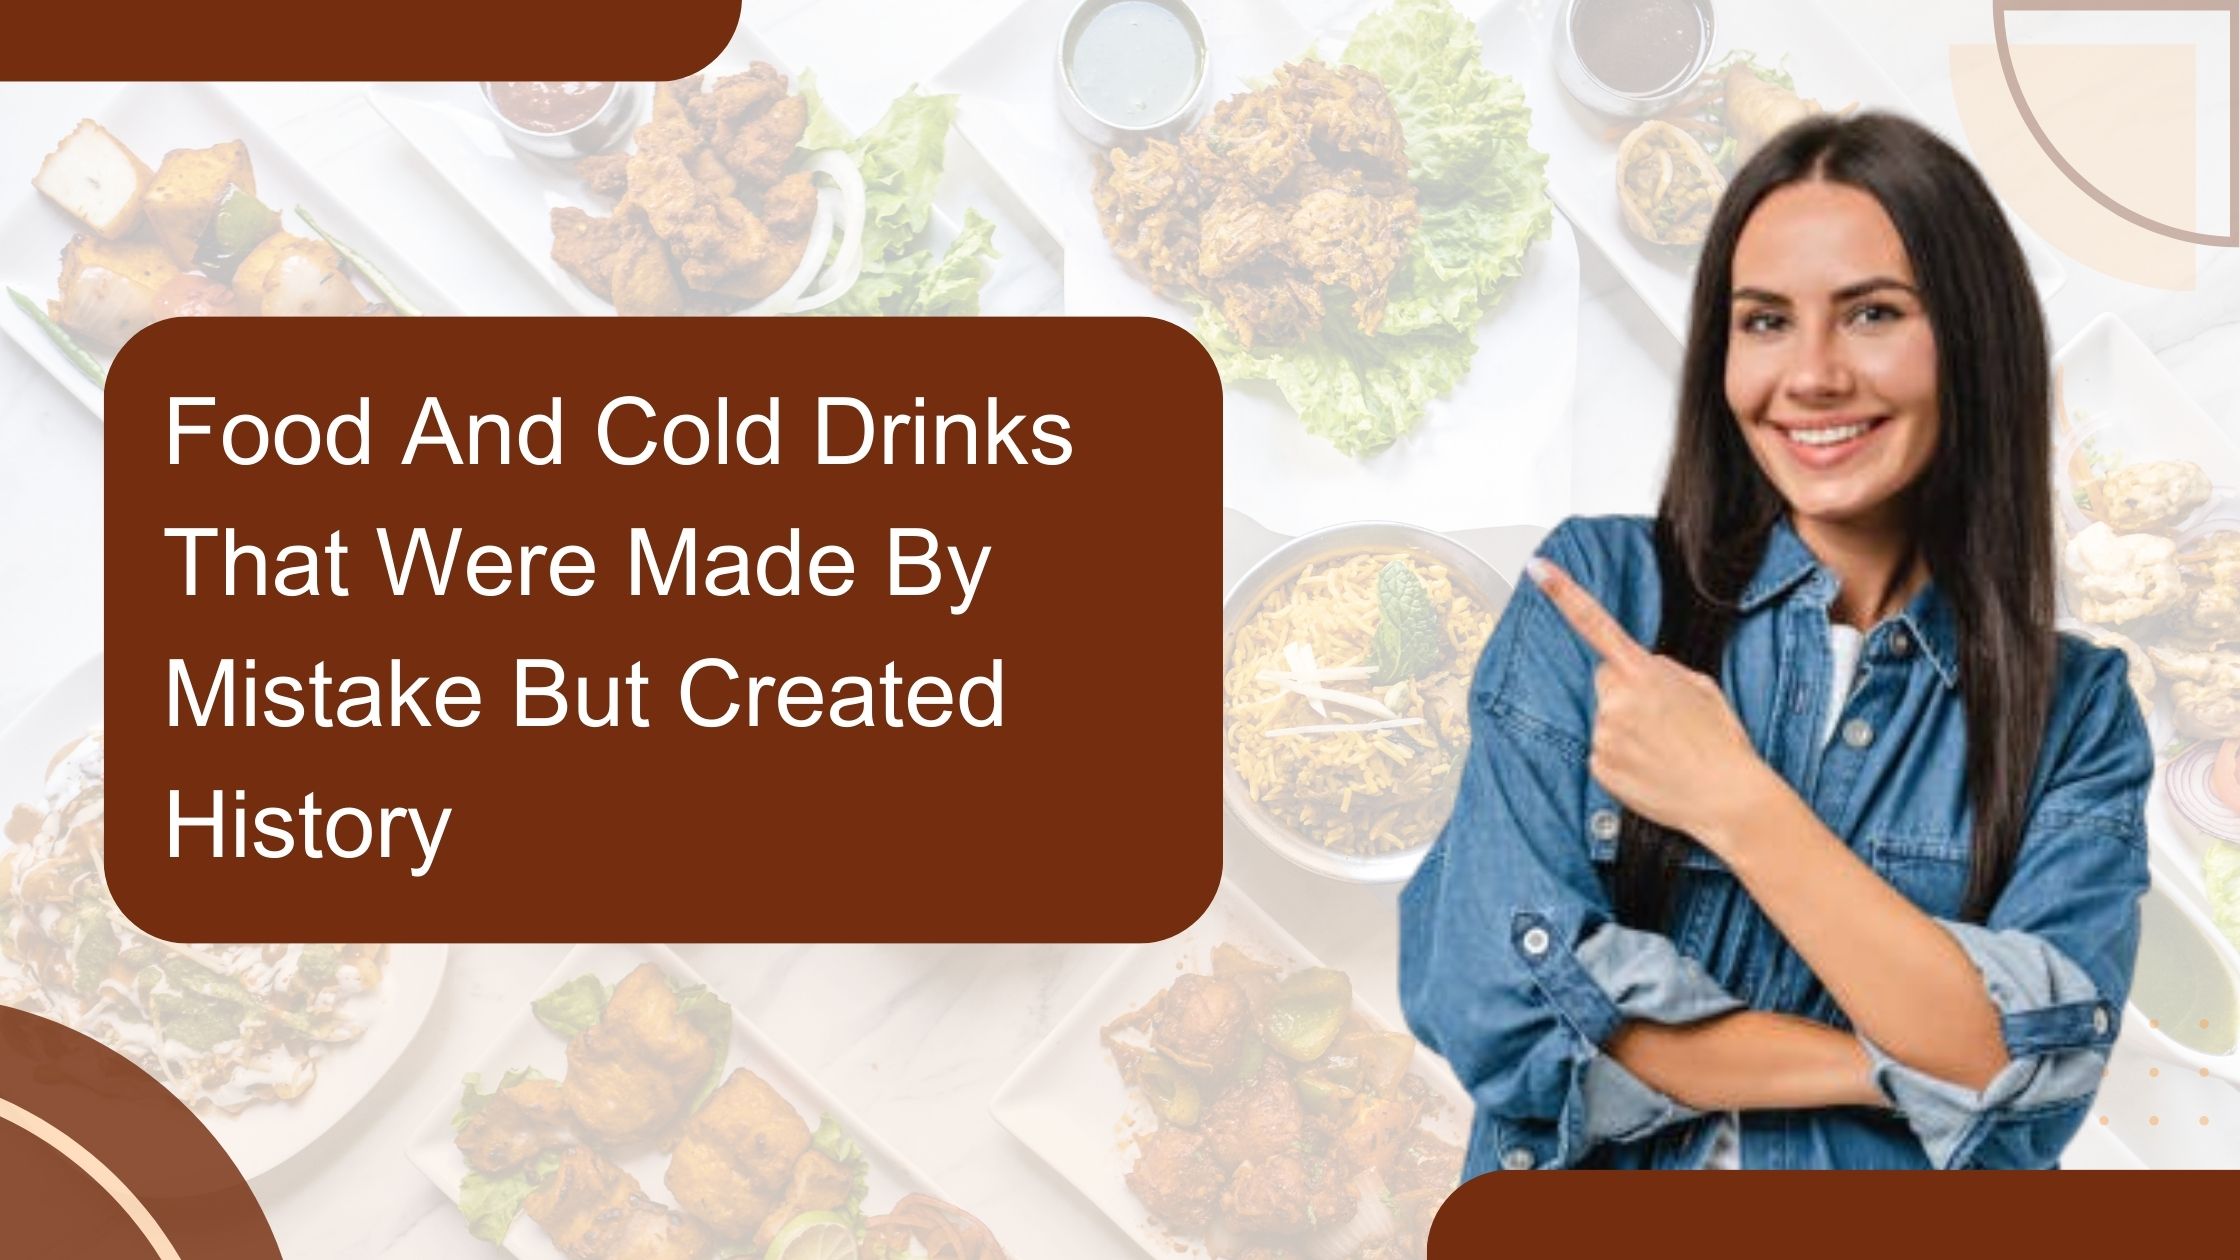 Food And Cold Drinks That Were Made By Mistake But Created History